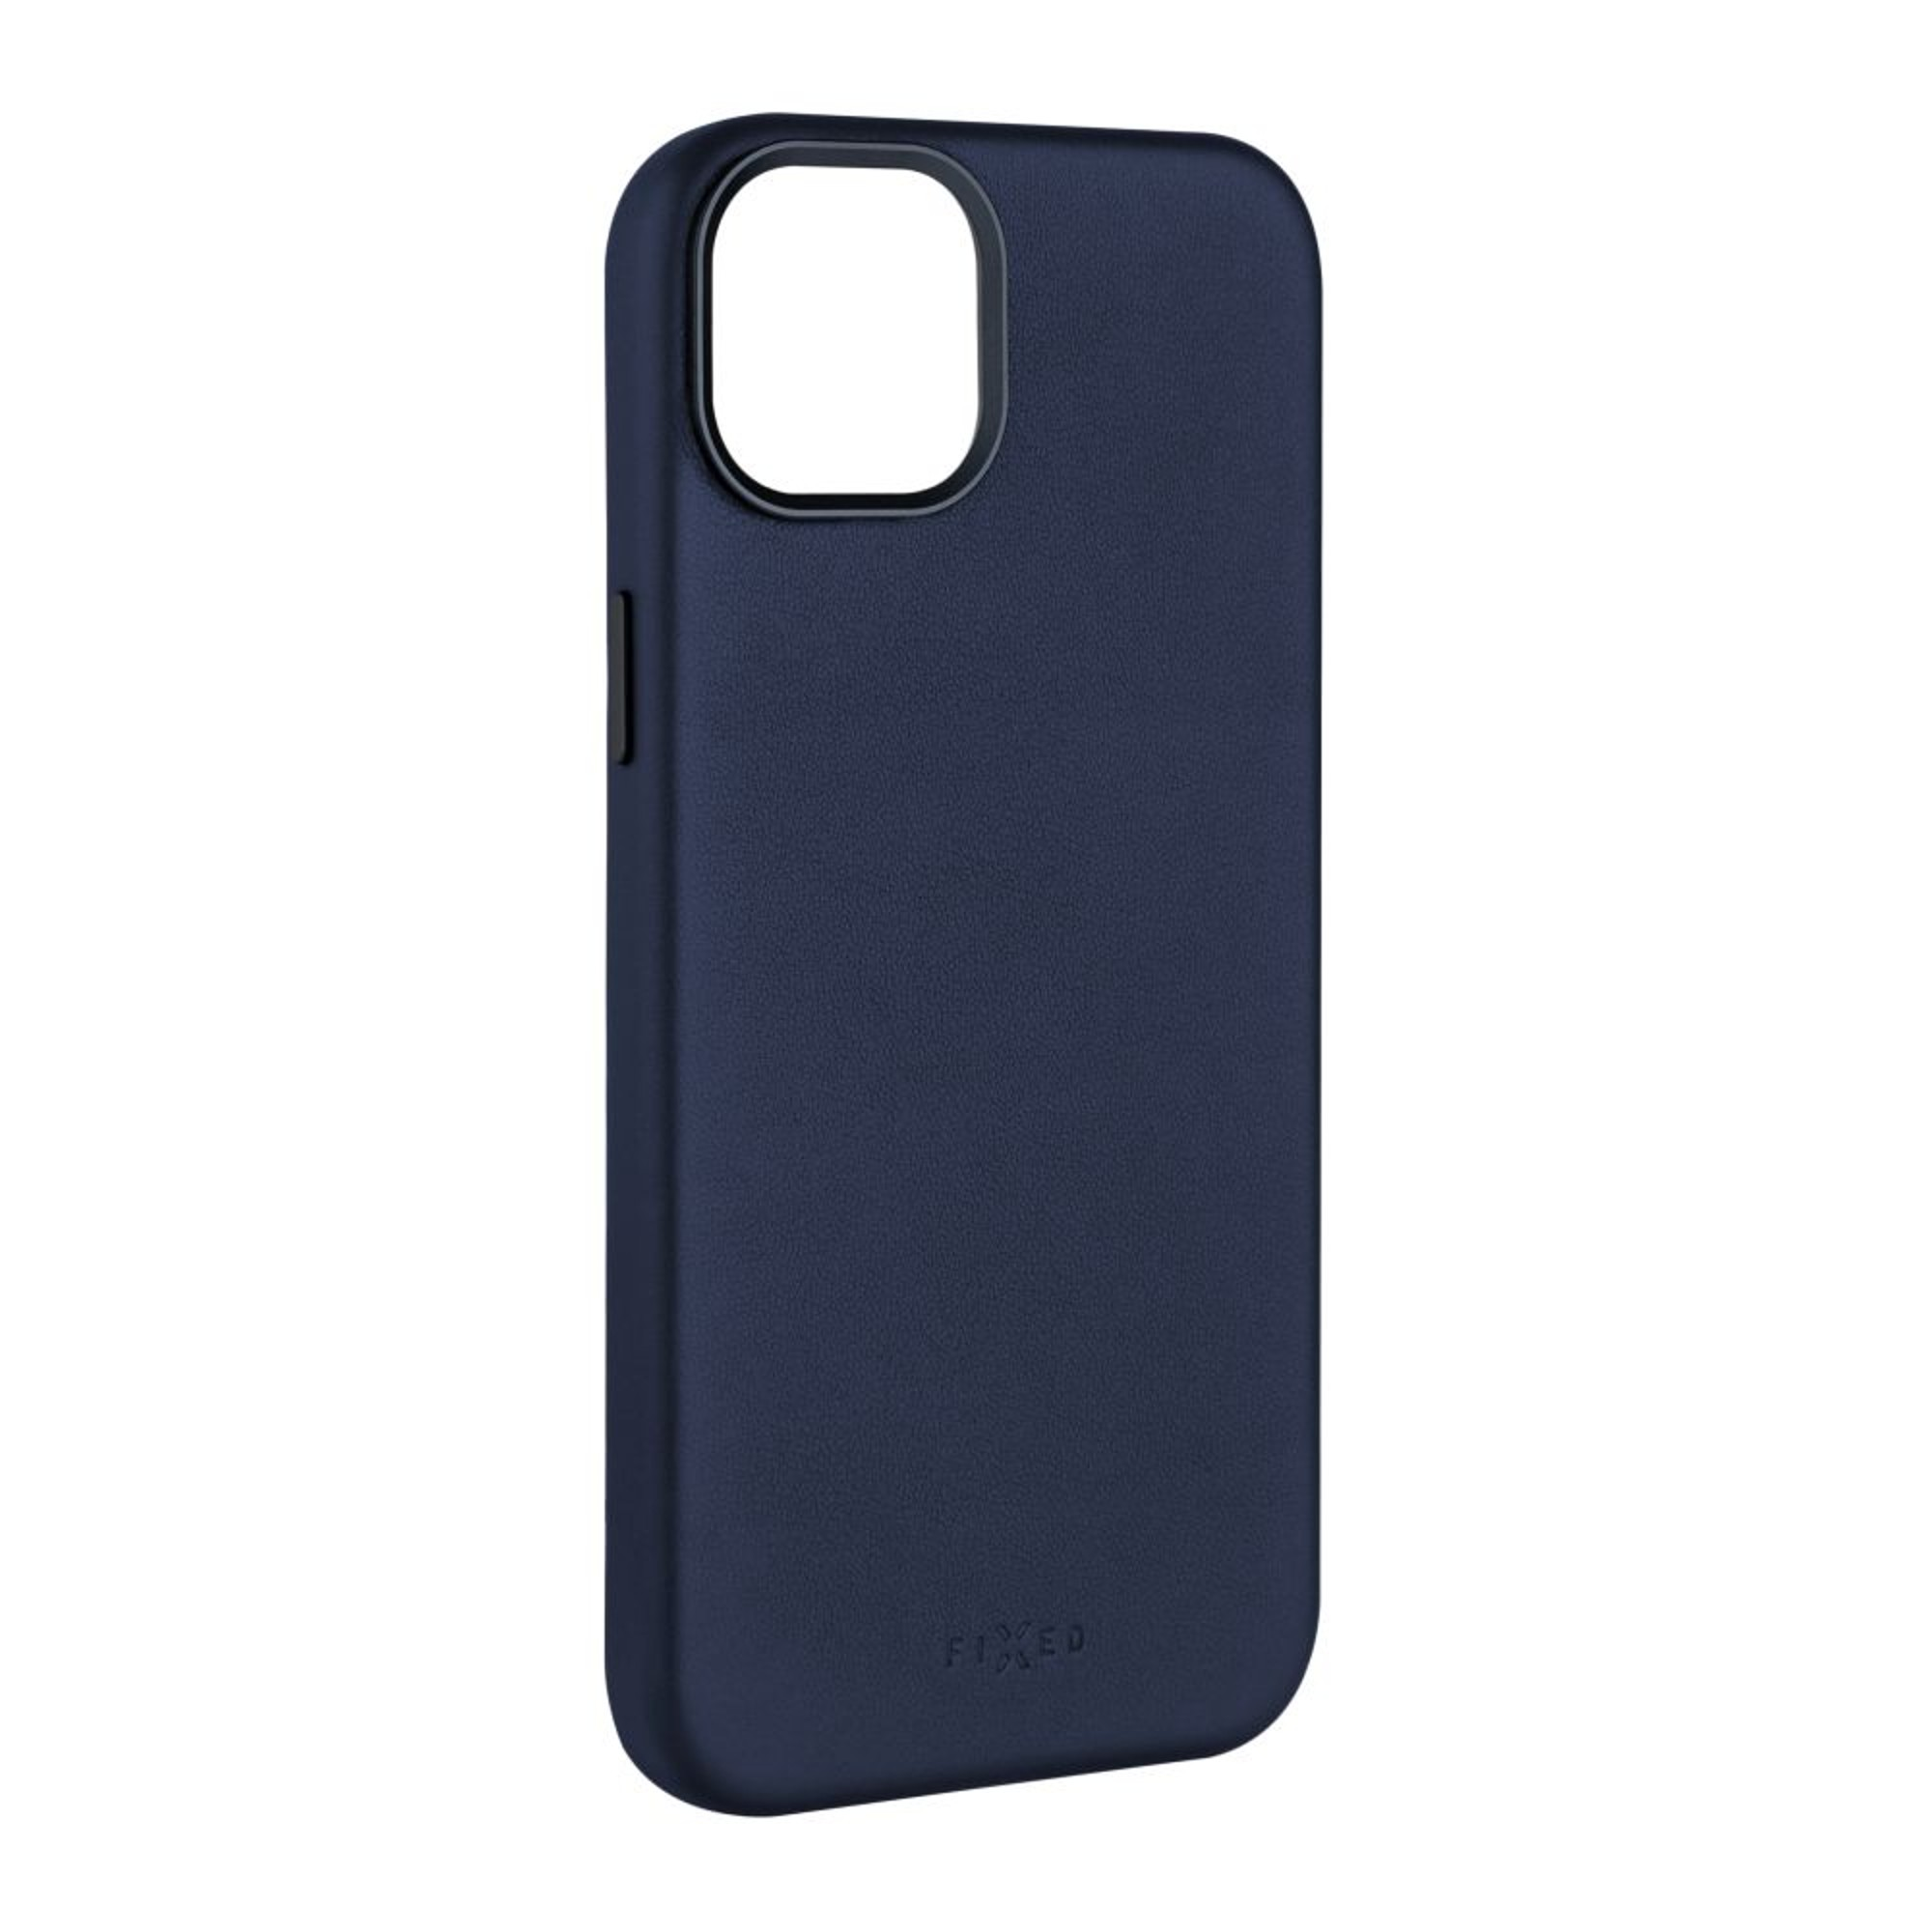 FIXED FIXLM-723-BL, Backcover, Apple, 13, iPhone Blau